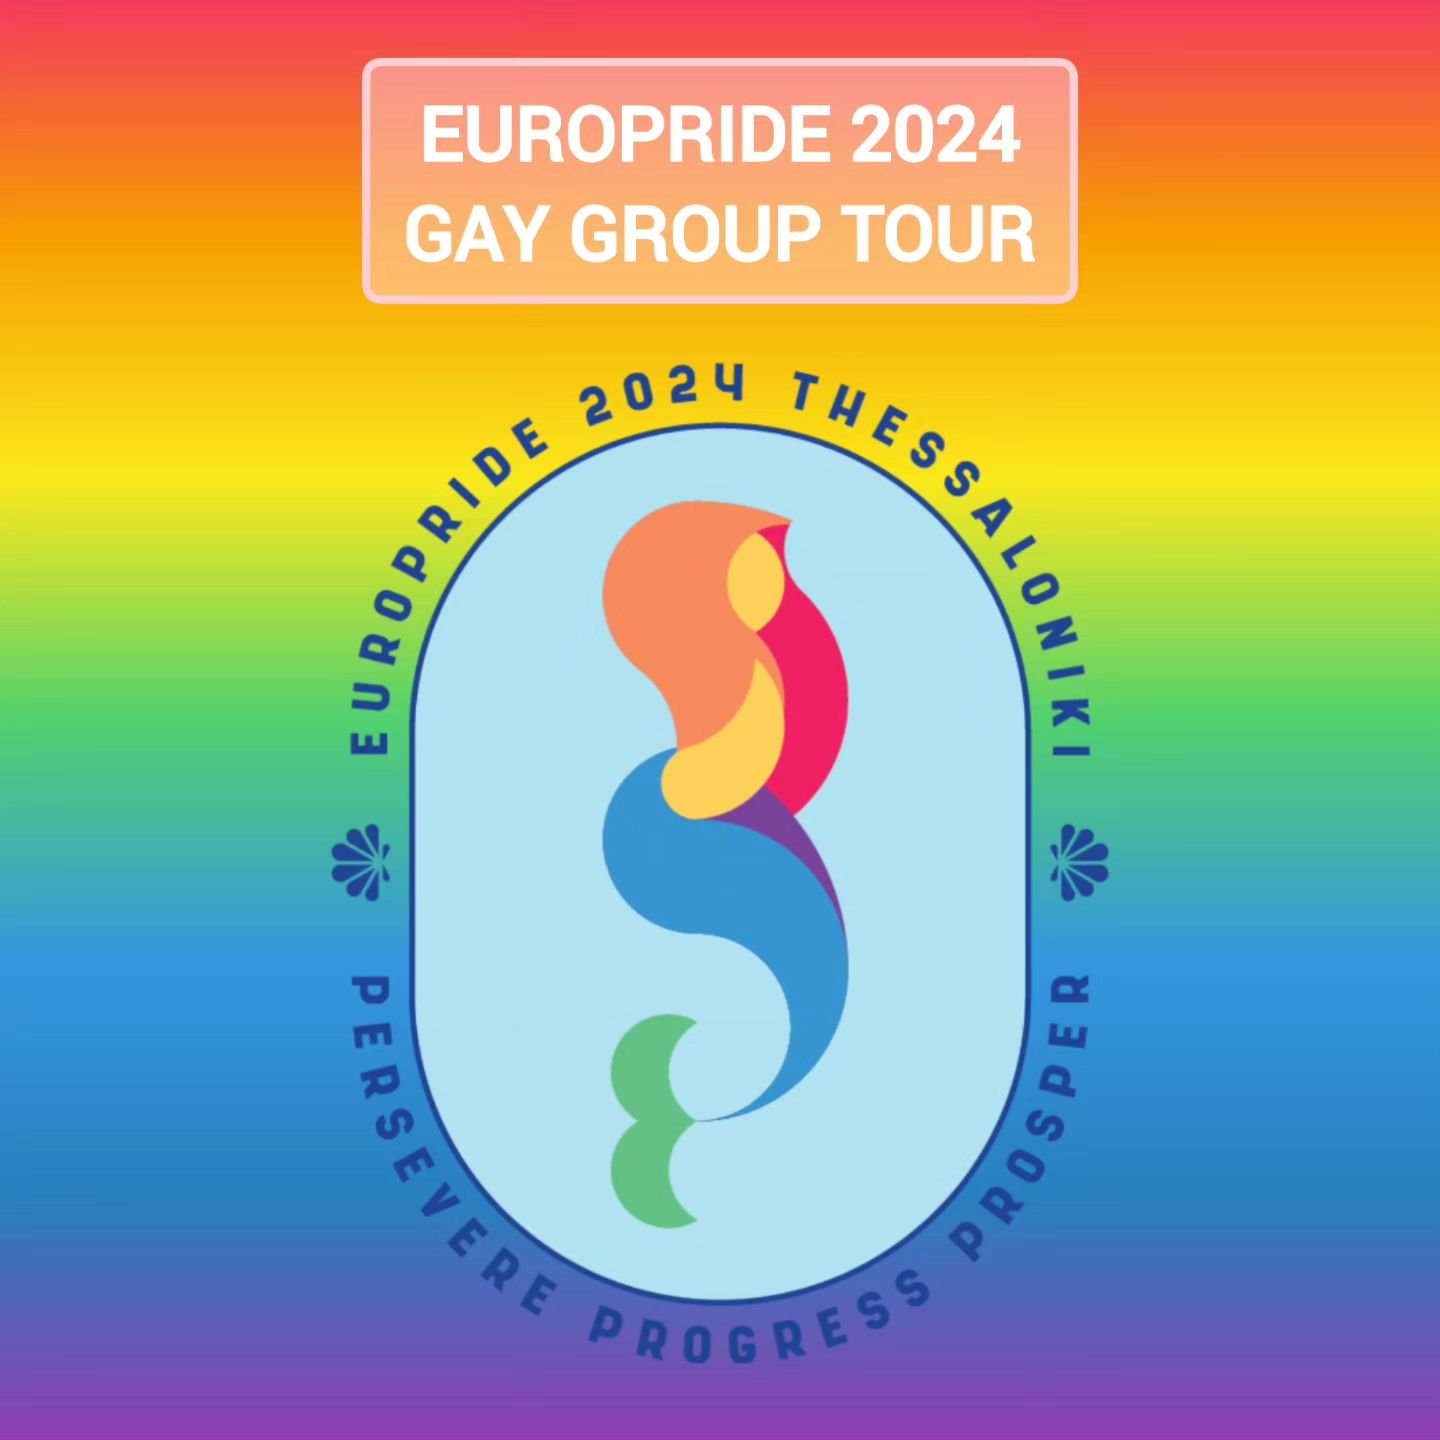 🏳️&zwj;🌈 JOIN US ON THIS FANTASTIC 7-DAY GAY GROUP TOUR IN GREECE, WITH EUROPRIDE THESSALONIKI 2024! 🏳️&zwj;🌈

When? JUNE 24-30, 2024

📣 The time to book is NOW 😉

Let's have fun in this unique celebration while visiting Thessaloniki Old Town, 